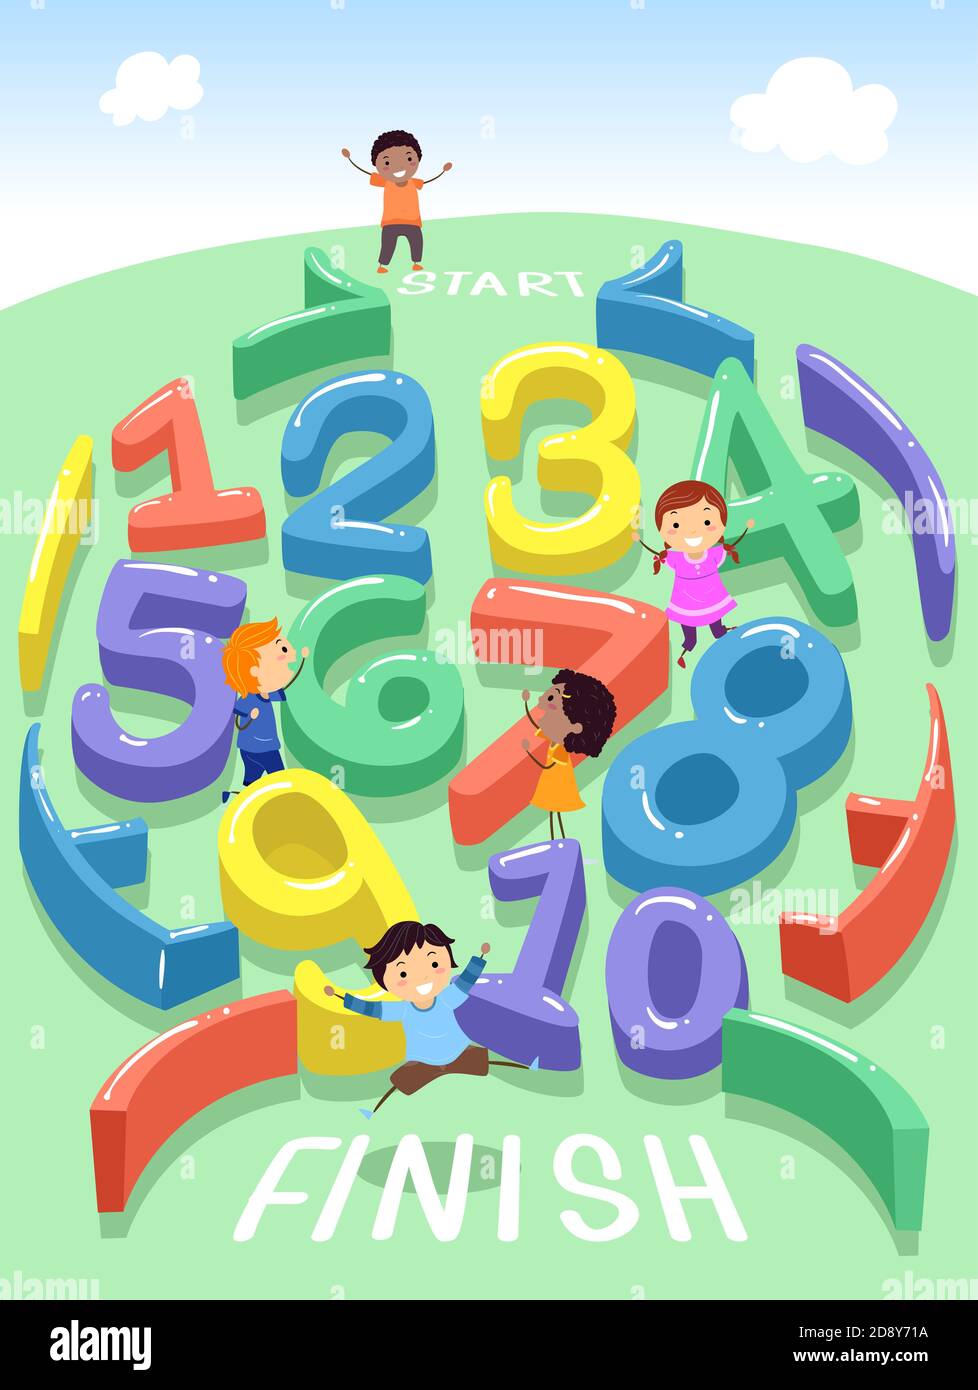 Illustration of Stickman Kids Playing through a Maze Puzzle Made of Numbers Stock Photo